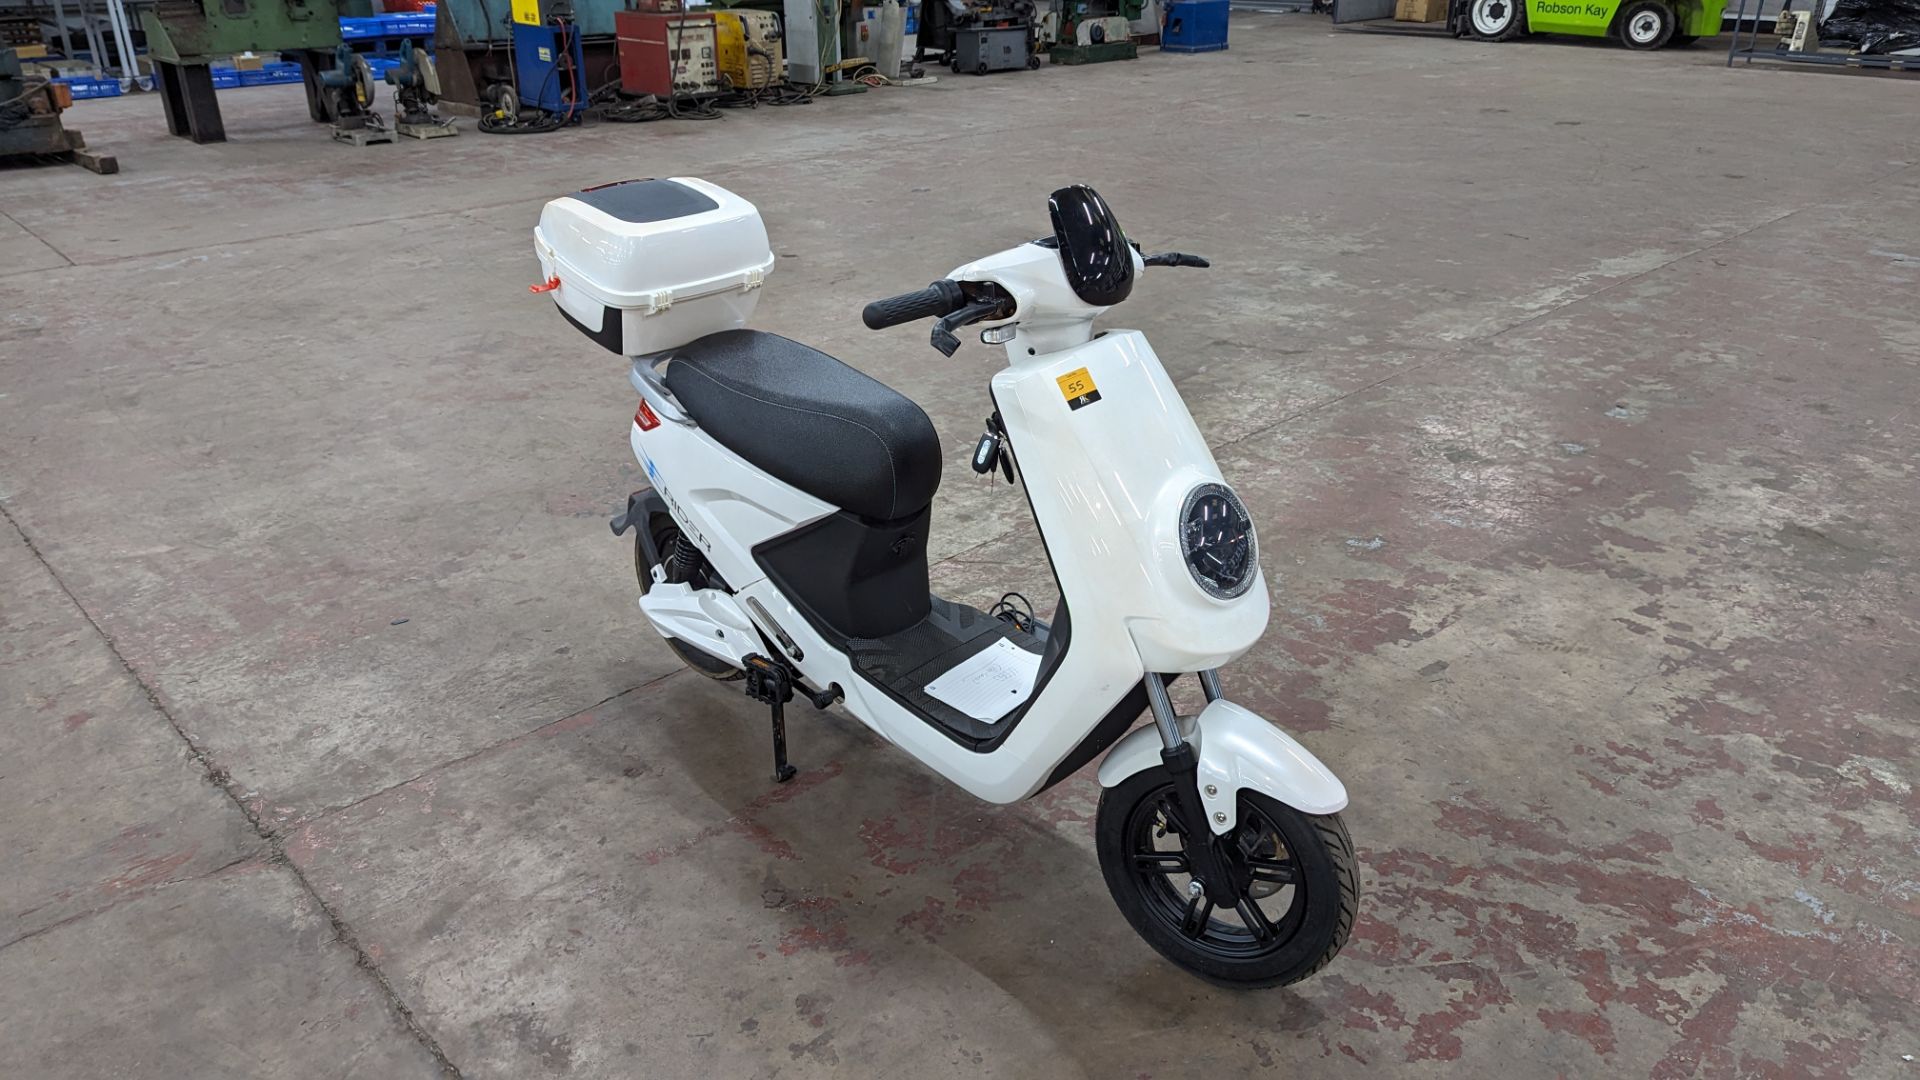 Model 18 Electric Bike: Used/low miles, white body with black detailing. This bike is not brand new, - Image 7 of 13